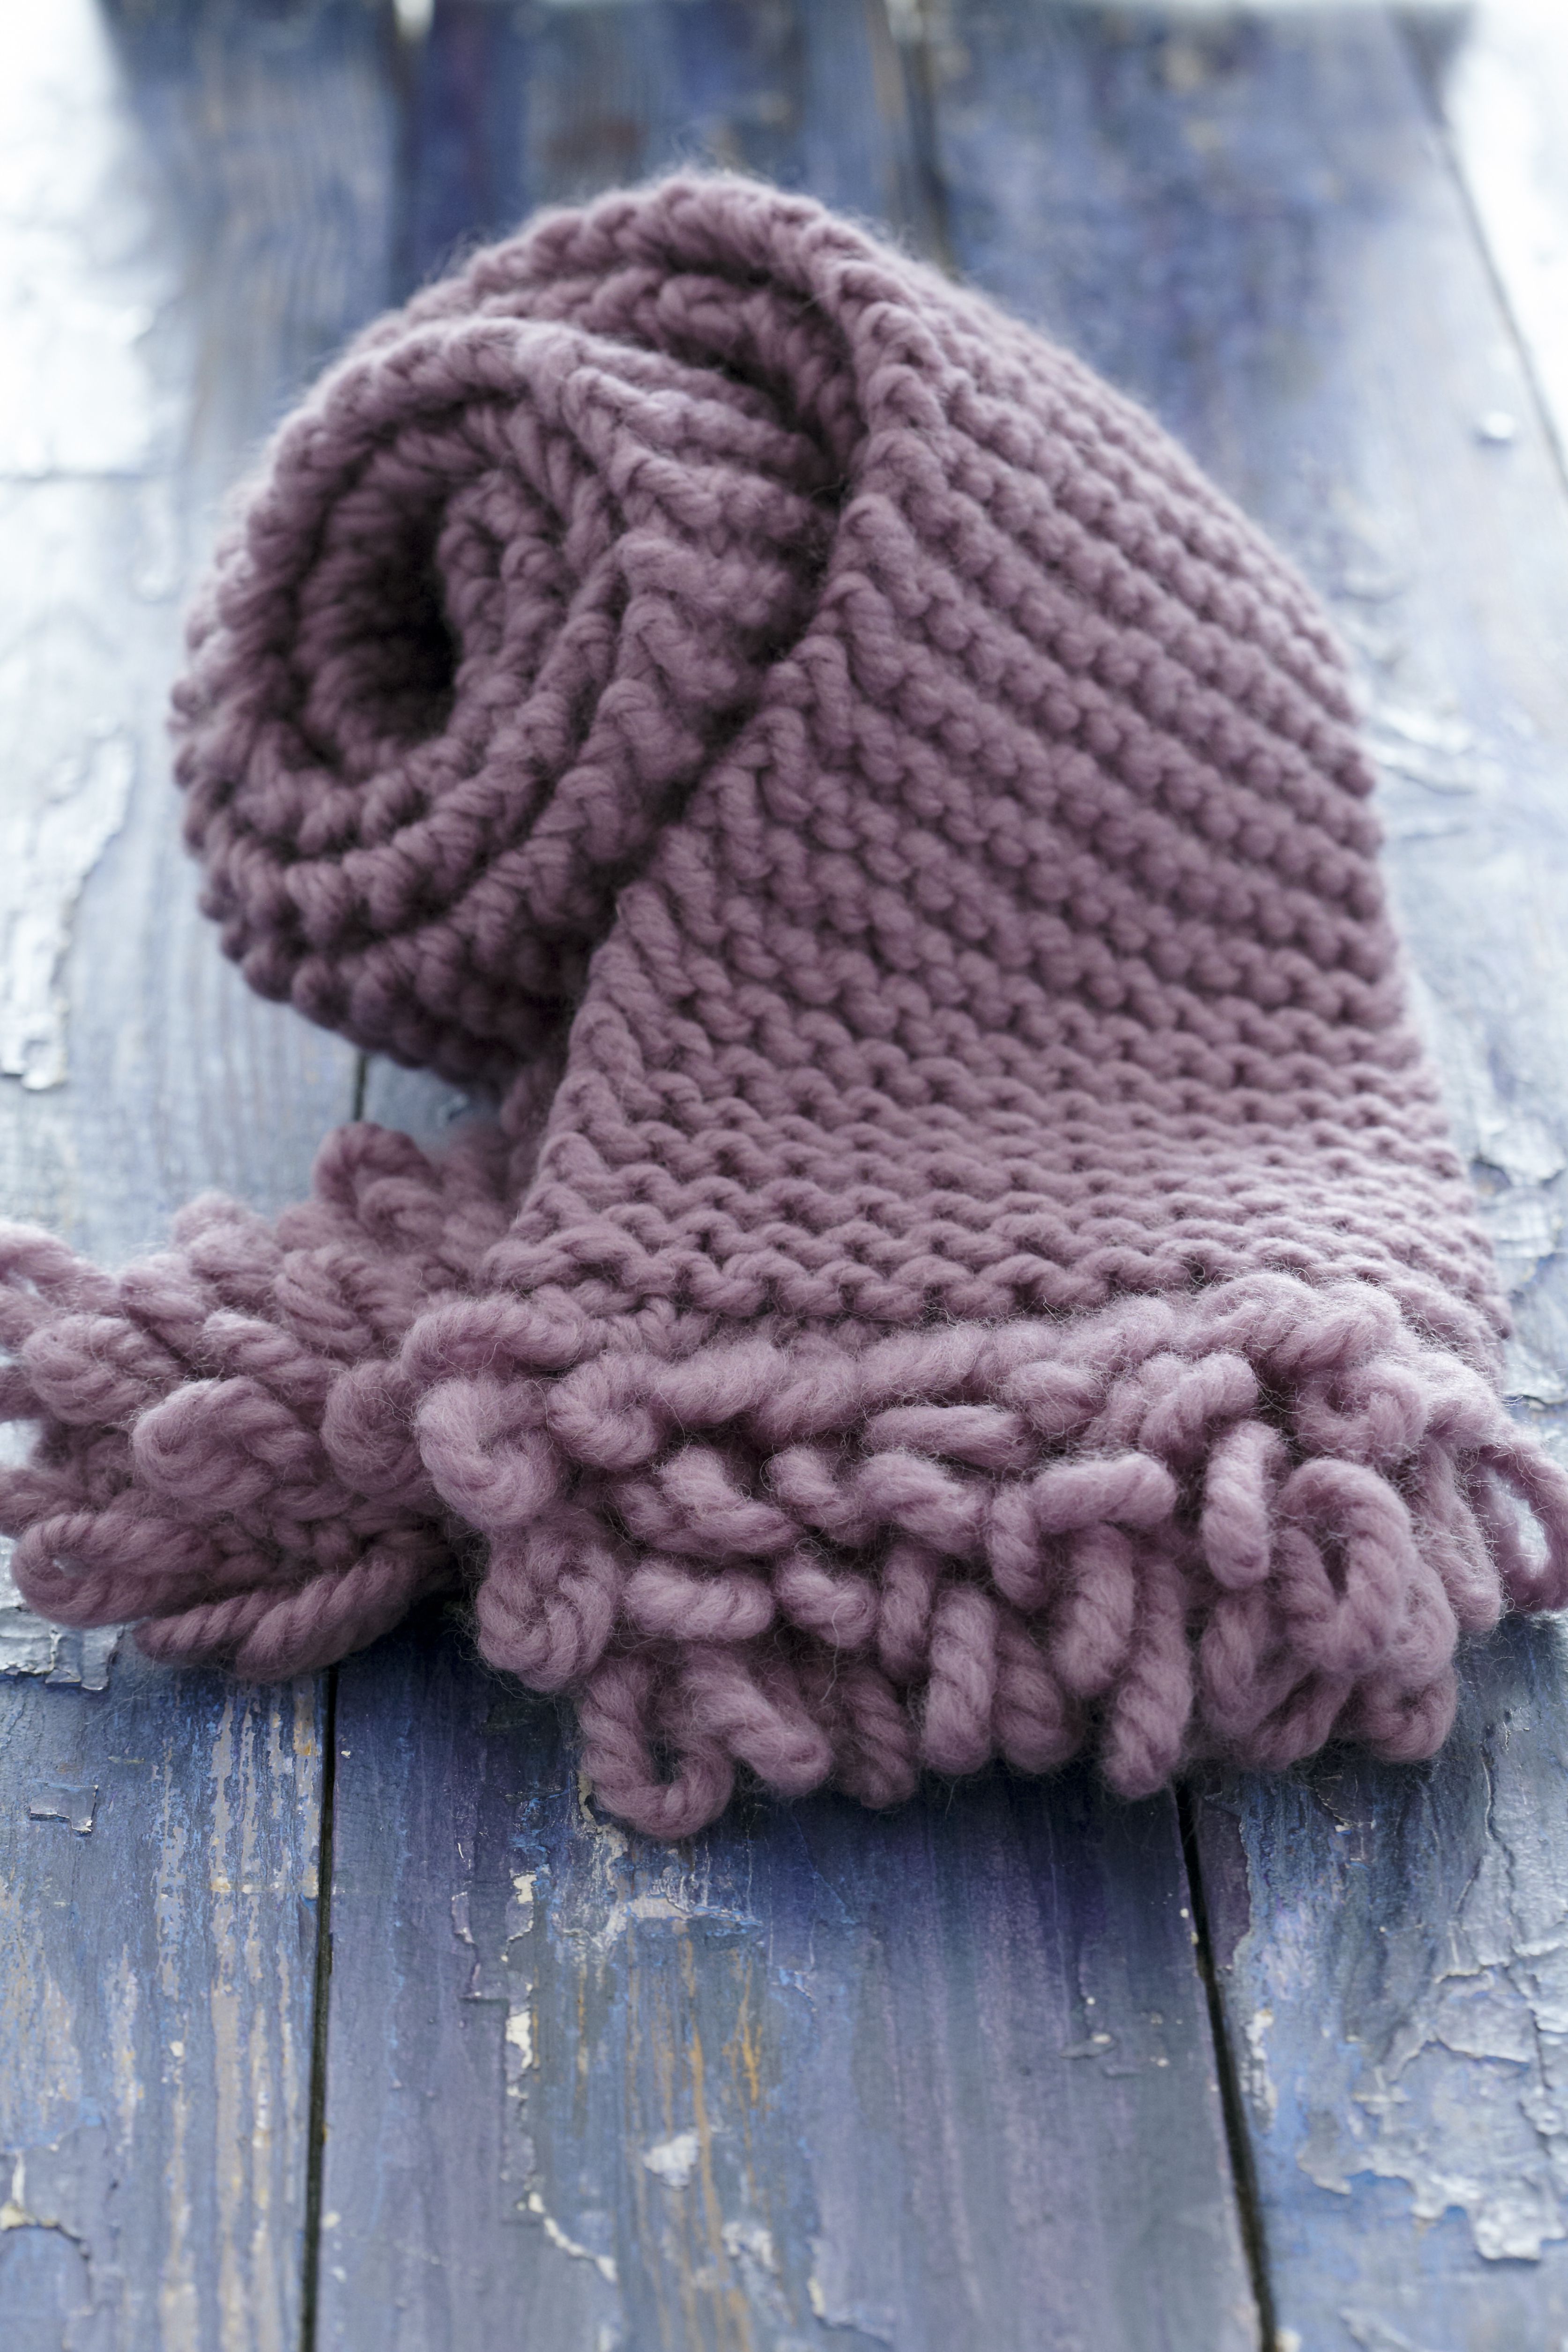 Make a Scarf With Some of the Bulky Yarn in Your Stash